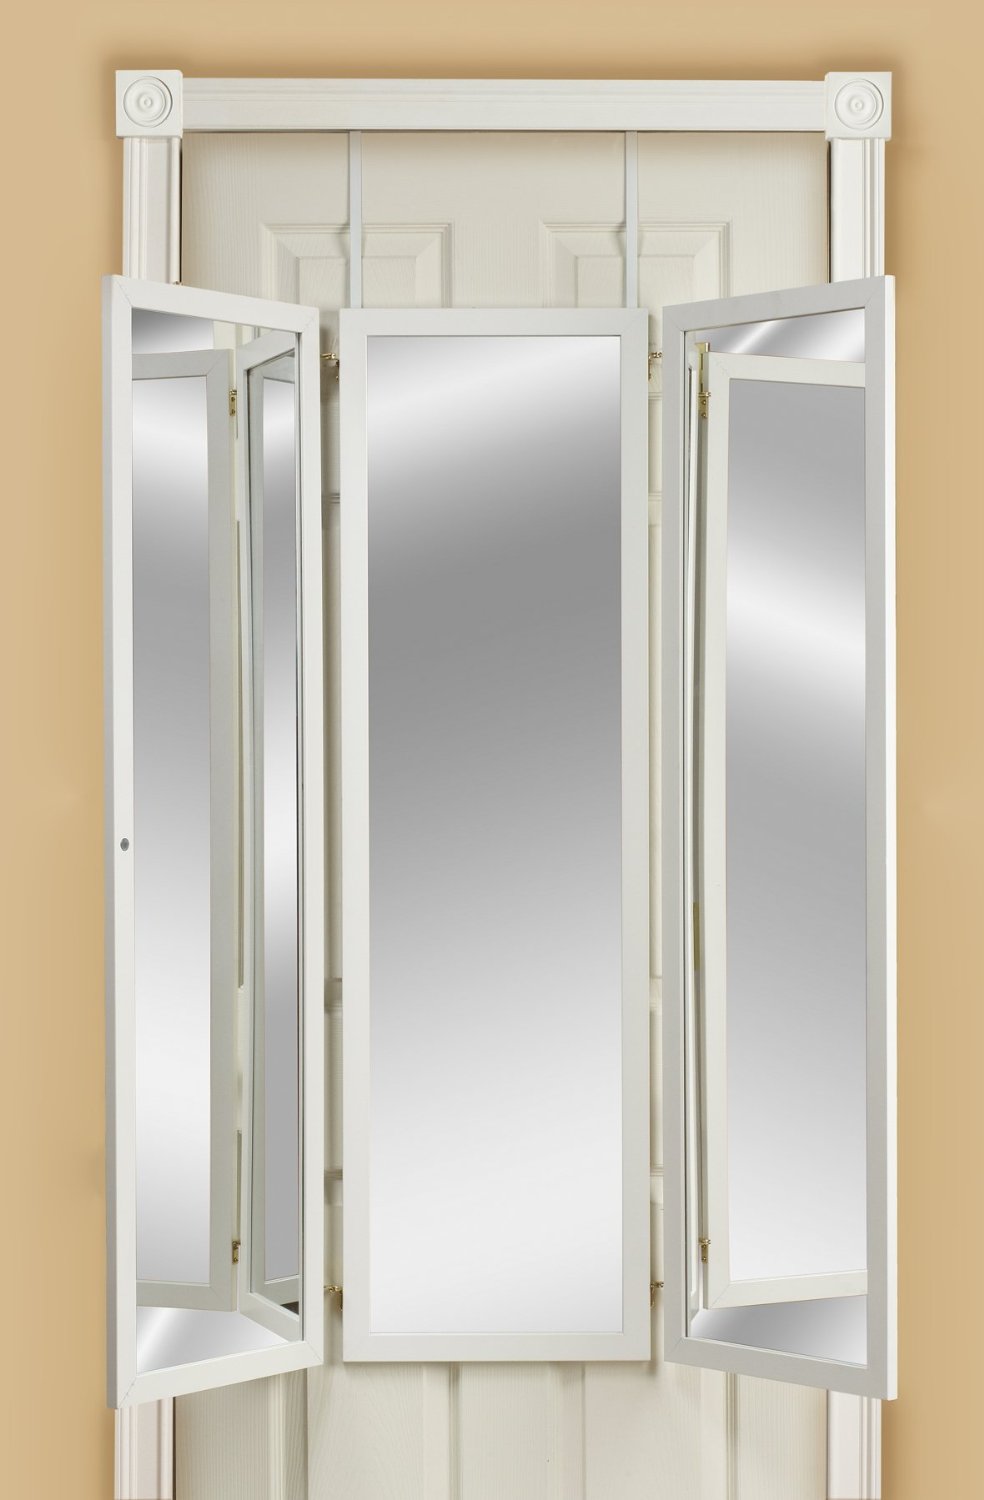 Mirrotek 3VU1448WT Triple View Professional Over The Door Dressing Mirror with 4 Mirrors, White